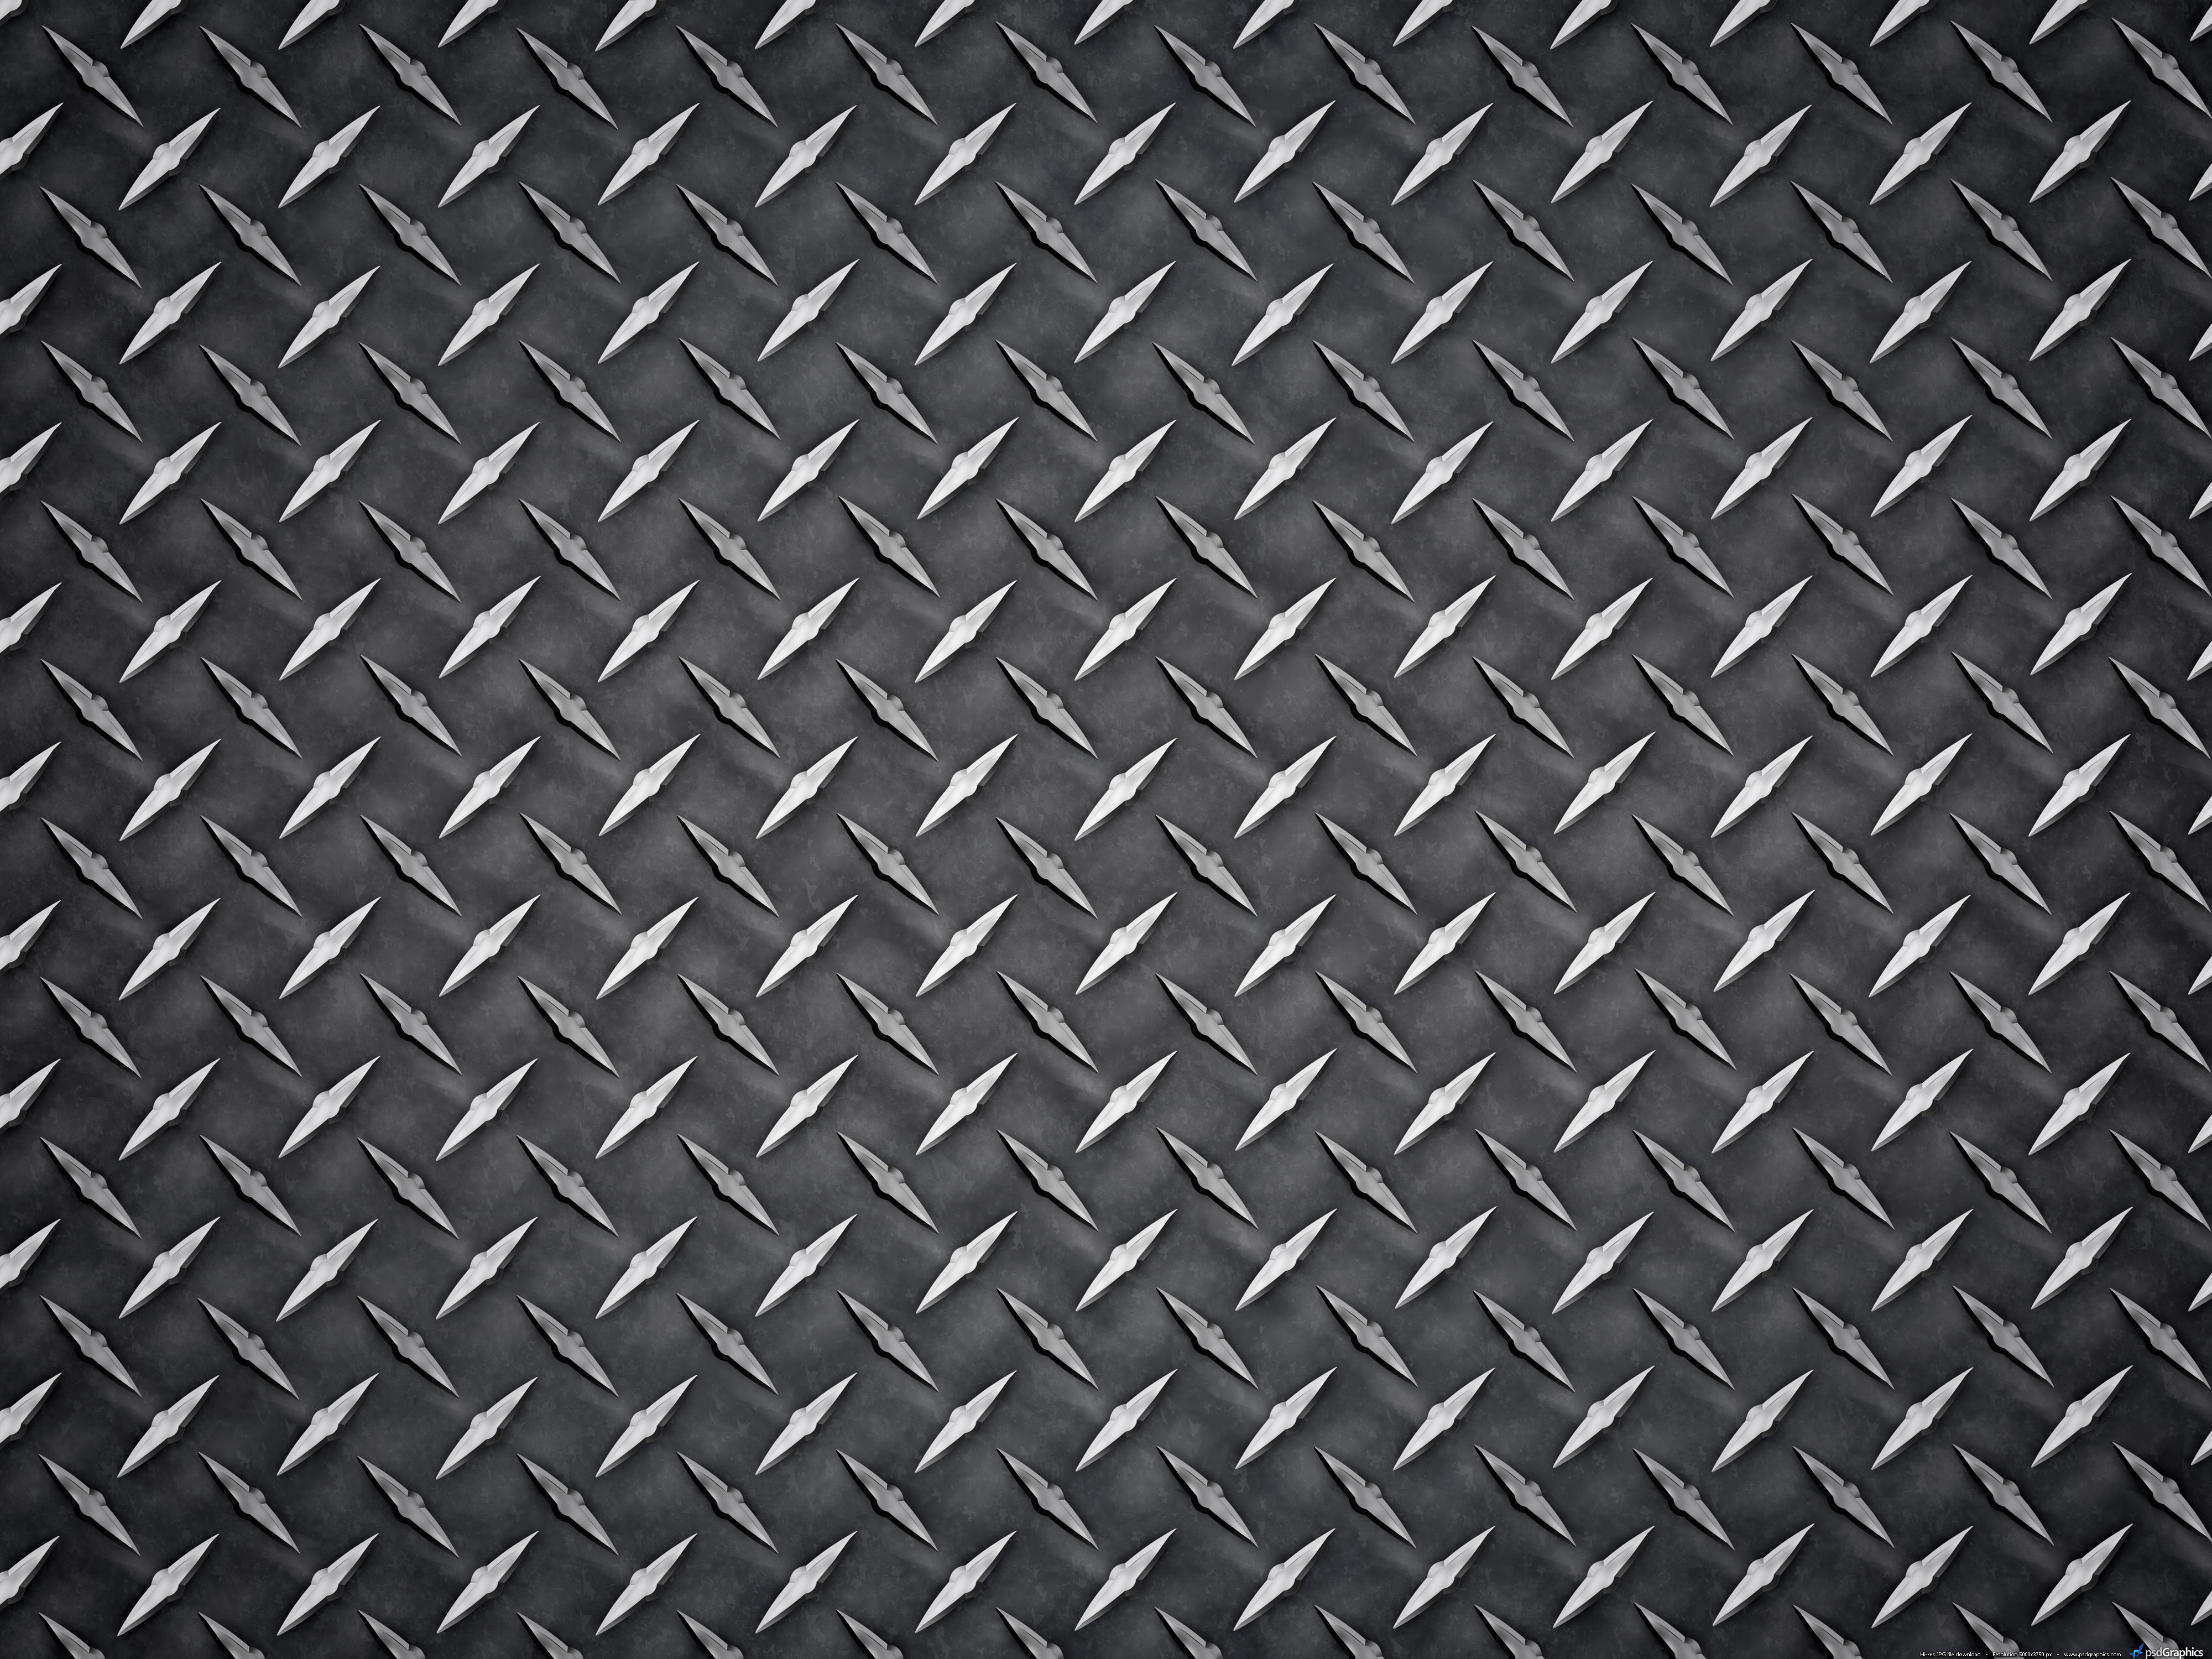  stainless steel mesh background metal plate with rivets background